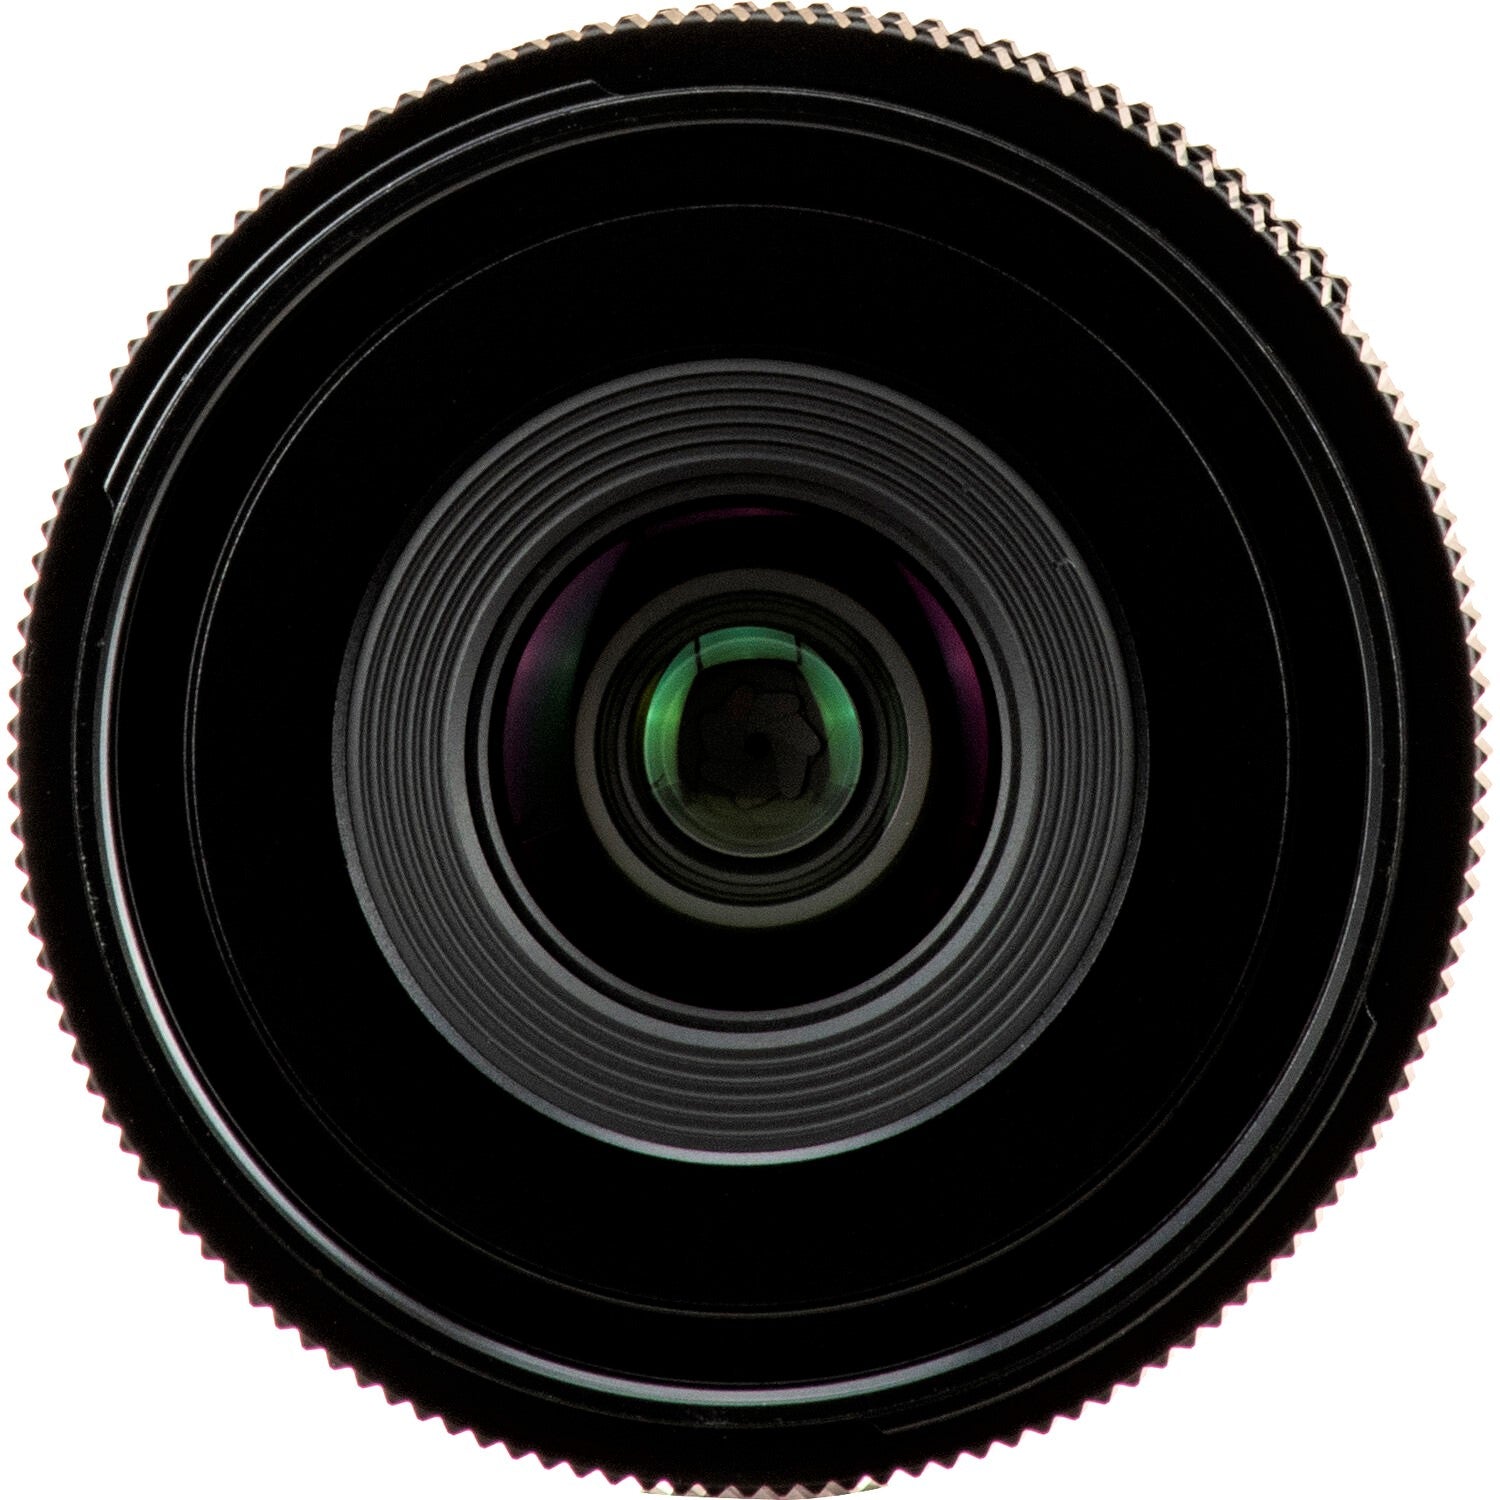 Sigma 24mm F3.5 DG DN Contemporary Lens (Leica L Mount) in a Full Close-Up View